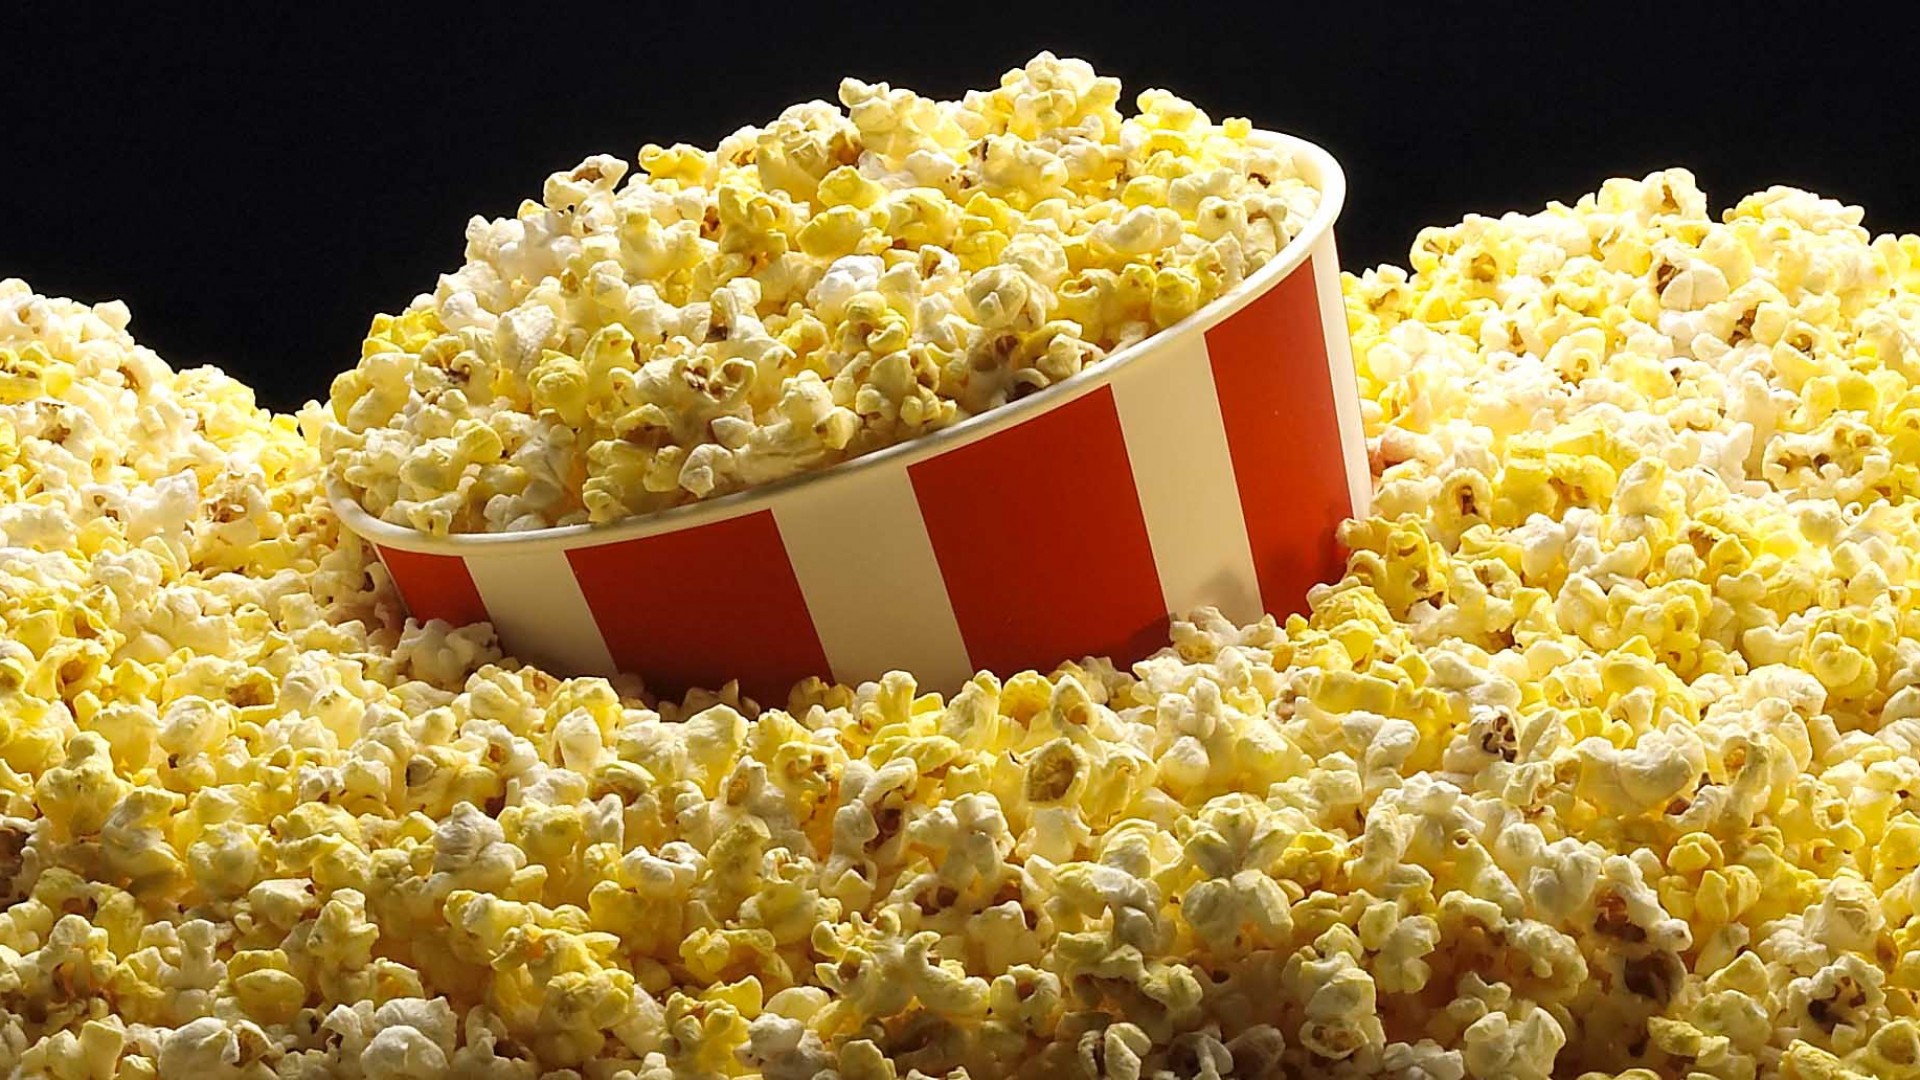 Popcorn: Various Types of Popcorn Suppliers and Machine